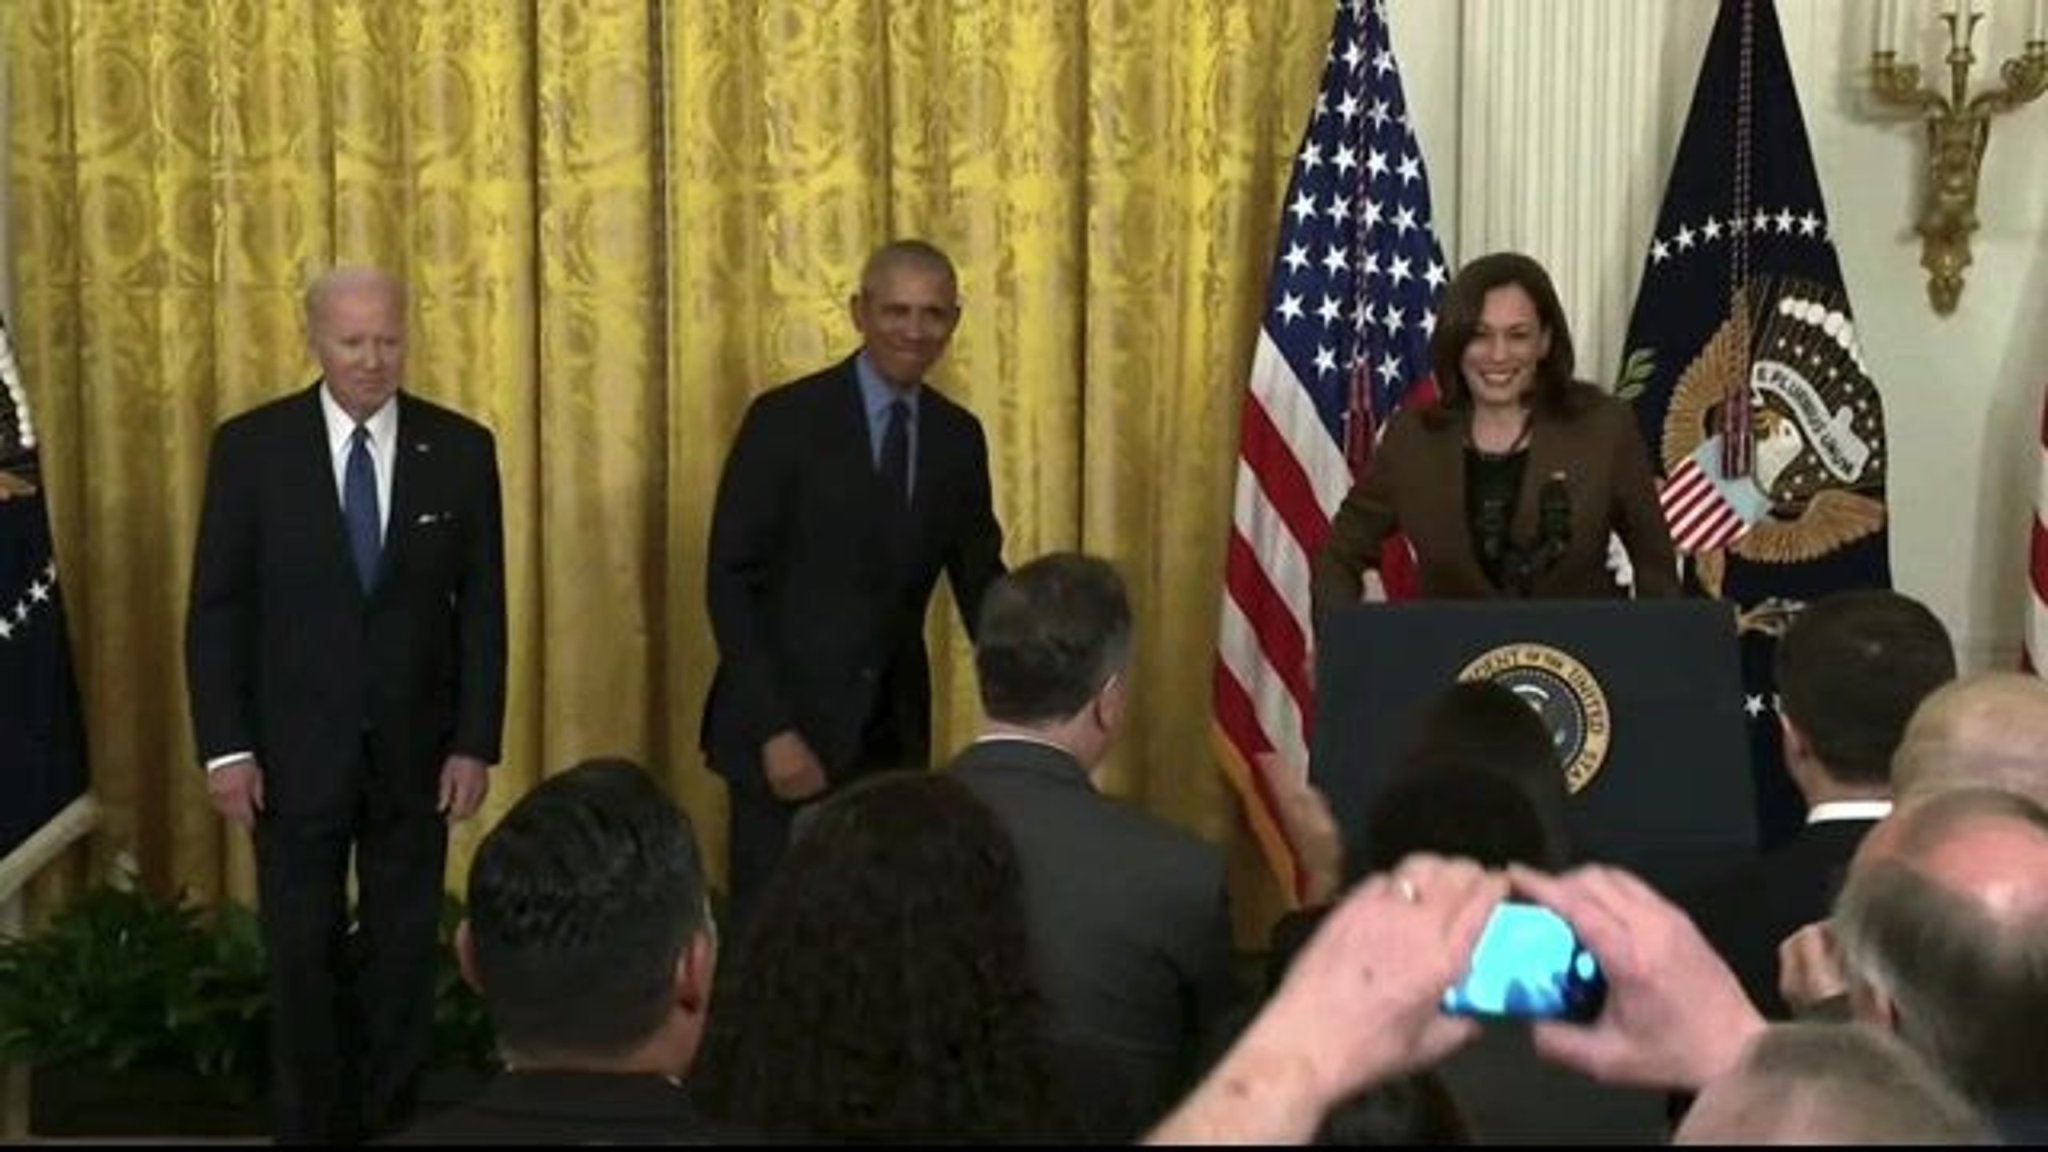 Former President Obama receives a standing ovation upon his first official return to the White House since 2017.